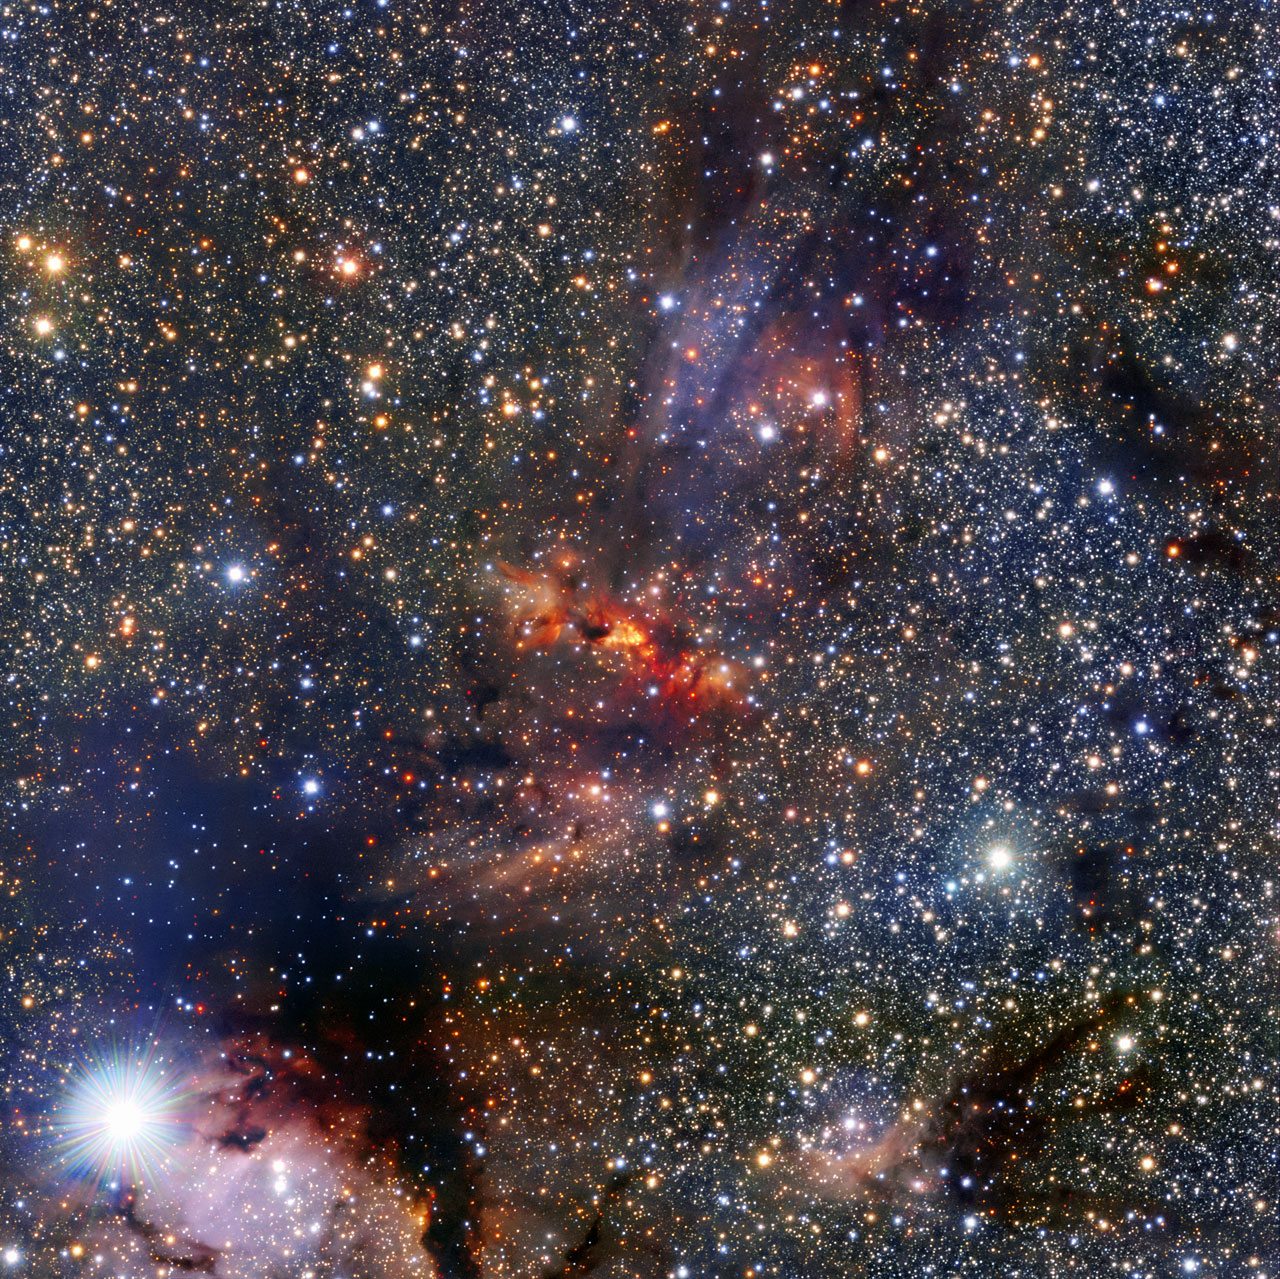 This image shows a region of the Milky Way that lies within the constellation of Scorpius, close to the central plane of the galaxy. The region hosts a dense cloud of dust and gas associated with the molecular cloud IRAS 16562-3959, clearly visible as an orange smudge among the rich pool of stars at the centre of the image. Clouds like these are breeding grounds for new stars. In the centre of this cloud the bright object known as G345.4938+01.4677 can just be seen beyond the veil of gas and dust. This is a very young star in the process of forming as the cloud collapses under gravity. The young star is very bright and heavy —  roughly 15 times more massive than the Sun — and featured in a recent Atacama Large Millimeter/submillimeter Array (ALMA) result. The team of astronomers made surprising discoveries within G345.4938+01.4677 — there is a large disc of gas and dust around the forming star as well as a stream of material flowing out from it. Theories predict that neither such a stream, nor the disc itself, are likely to exist around stars like G345.4938+01.4677 because the strong radiation from such massive new stars is thought to push material away. This image was made using the Visible and Infrared Survey Telescope for Astronomy (VISTA), which is part of ESO’s Paranal Observatory in the Atacama Desert of Chile. It is the world’s largest survey telescope, with a main mirror that measures over four metres across. The colour image was produced by the VVV survey, which is one of six large public surveys that are devoted to mapping the southern sky. The bright star in the bottom left of the image is known as HD 153220.